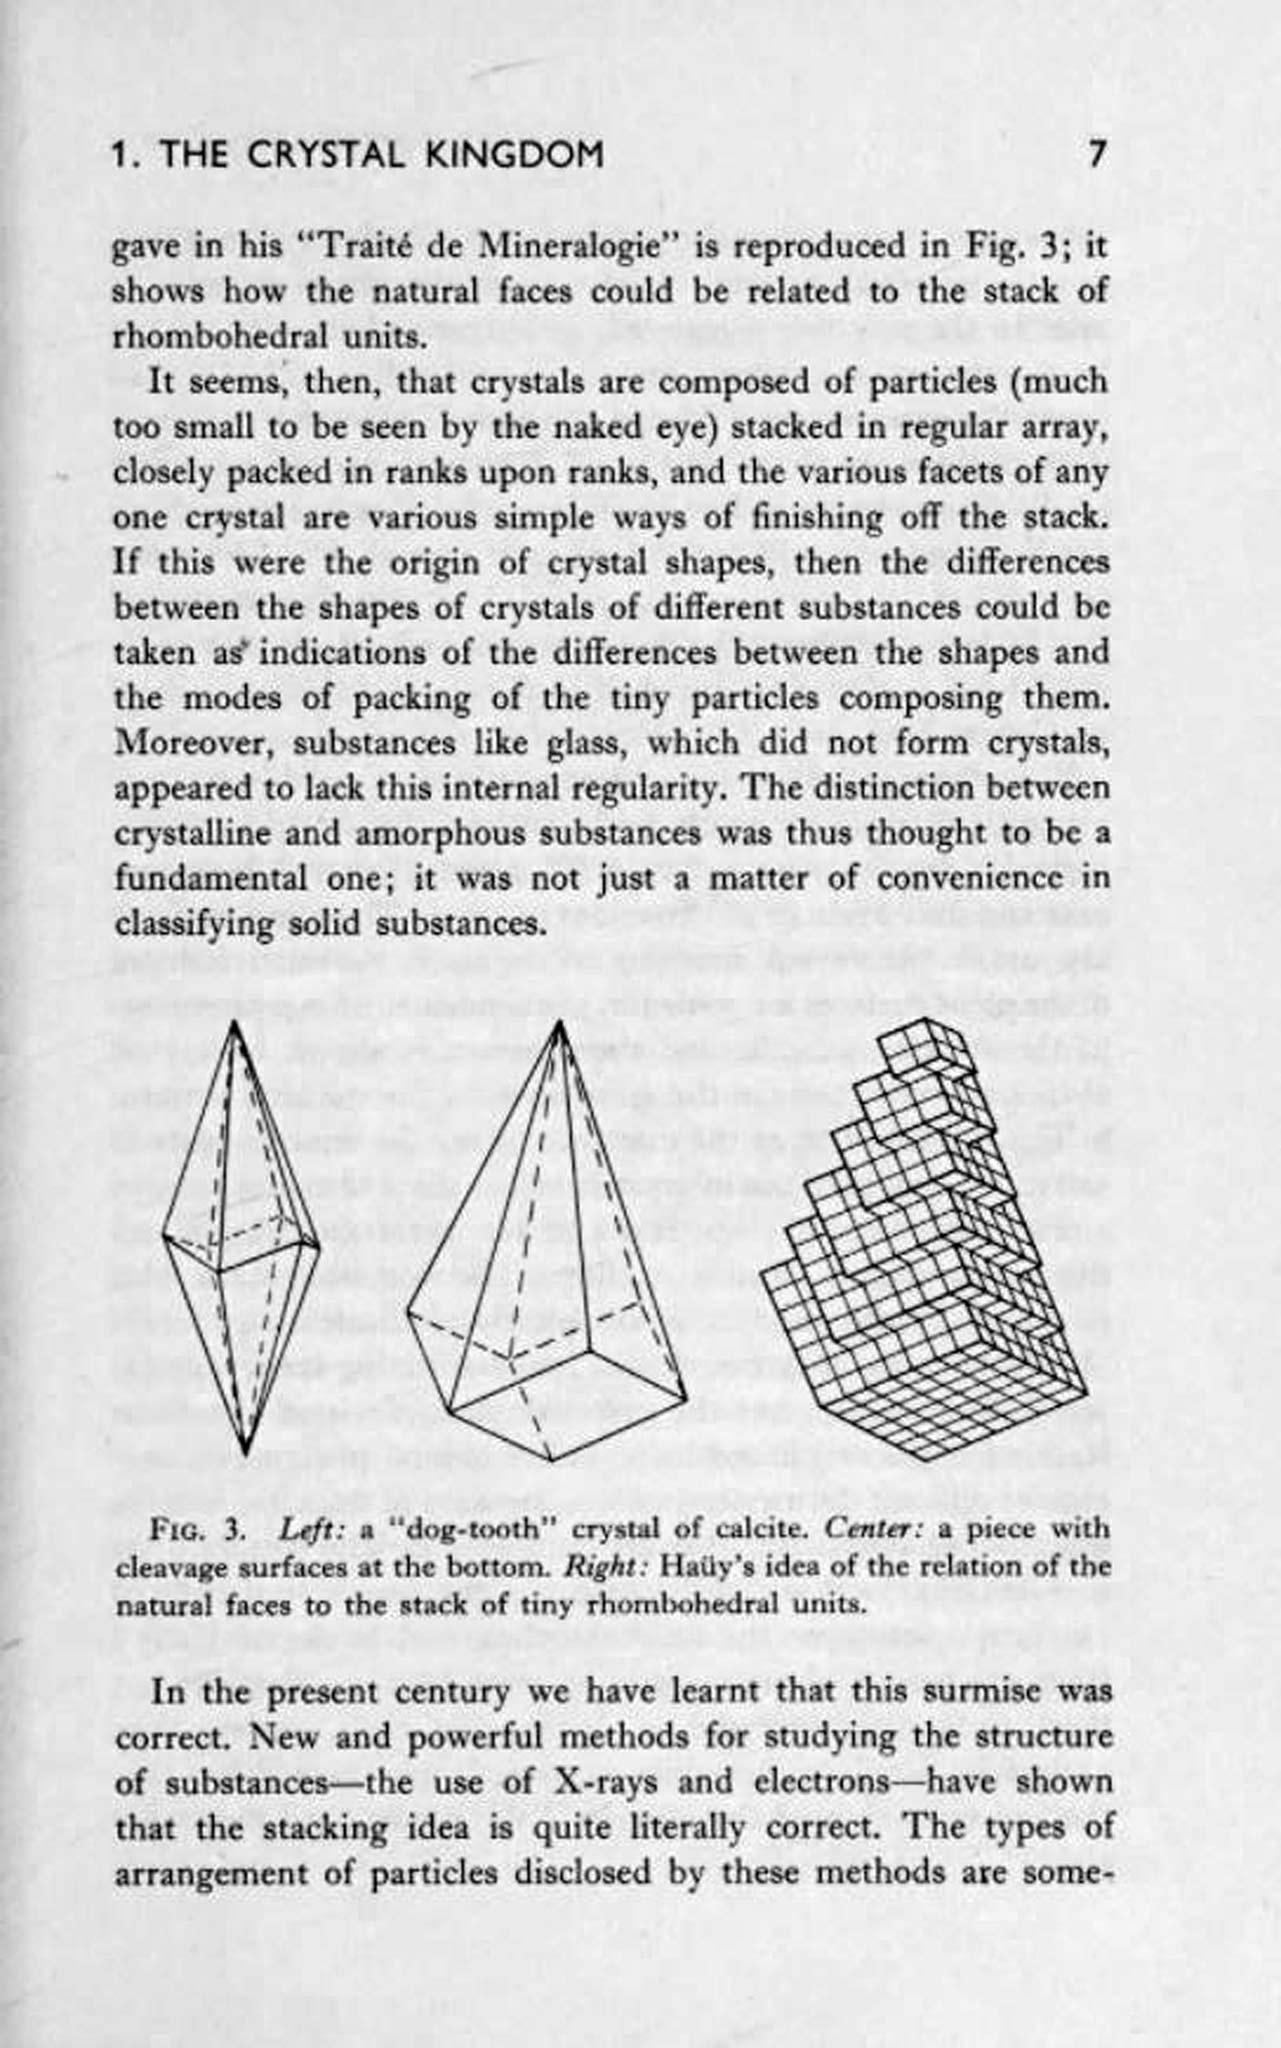 image from a book of crystal formations